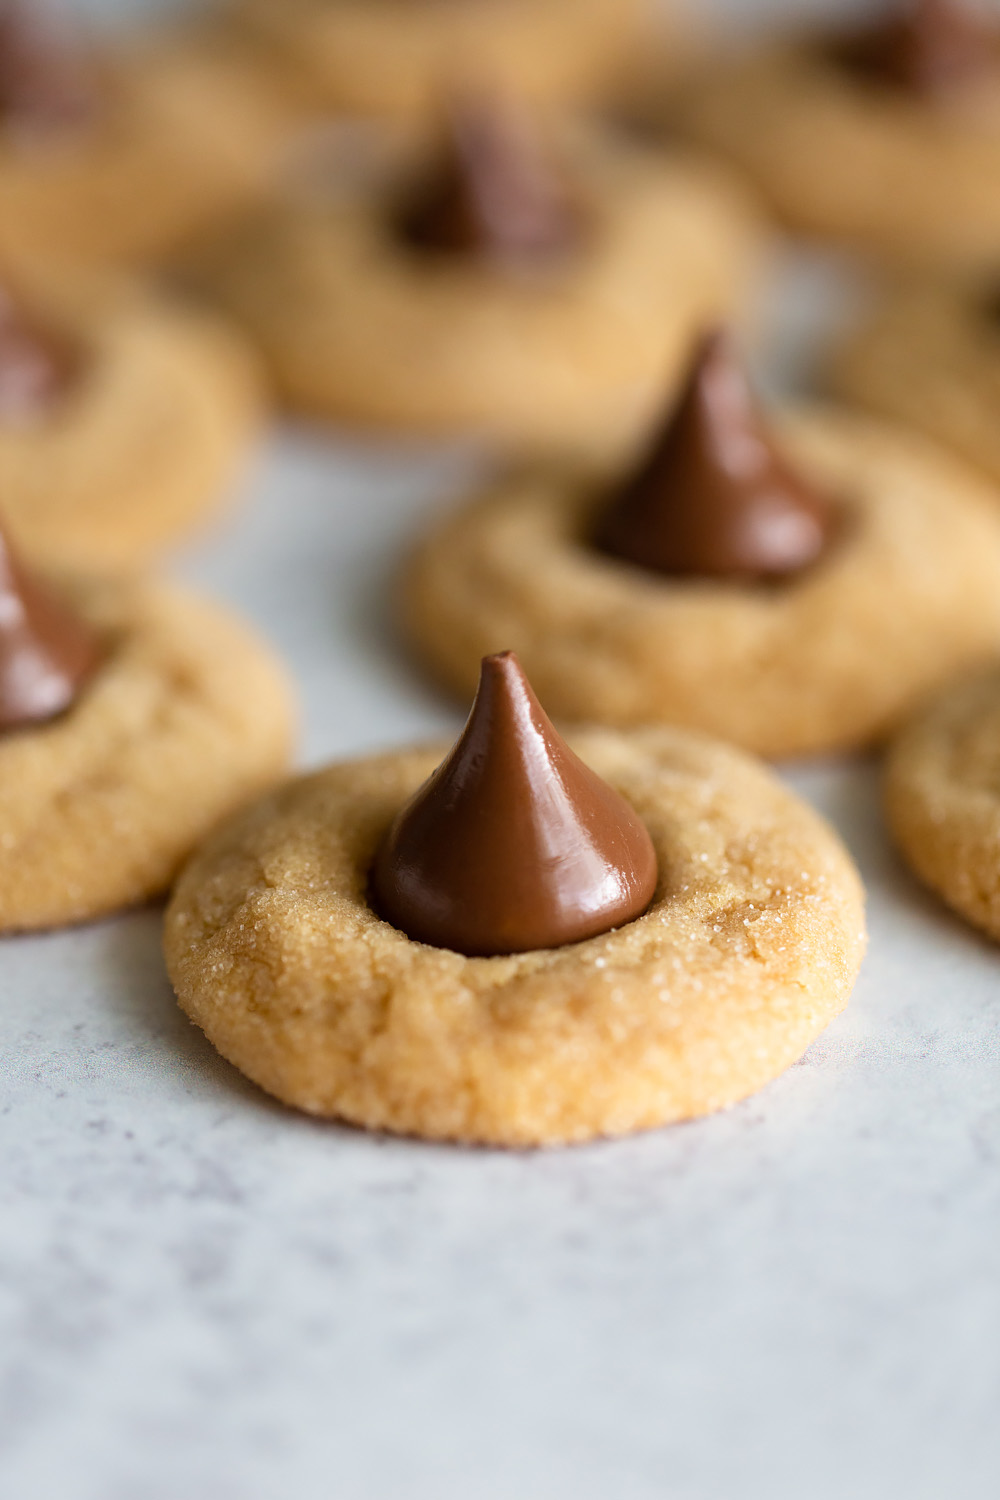 peanut butter blossoms with a Hershye's kiss up close